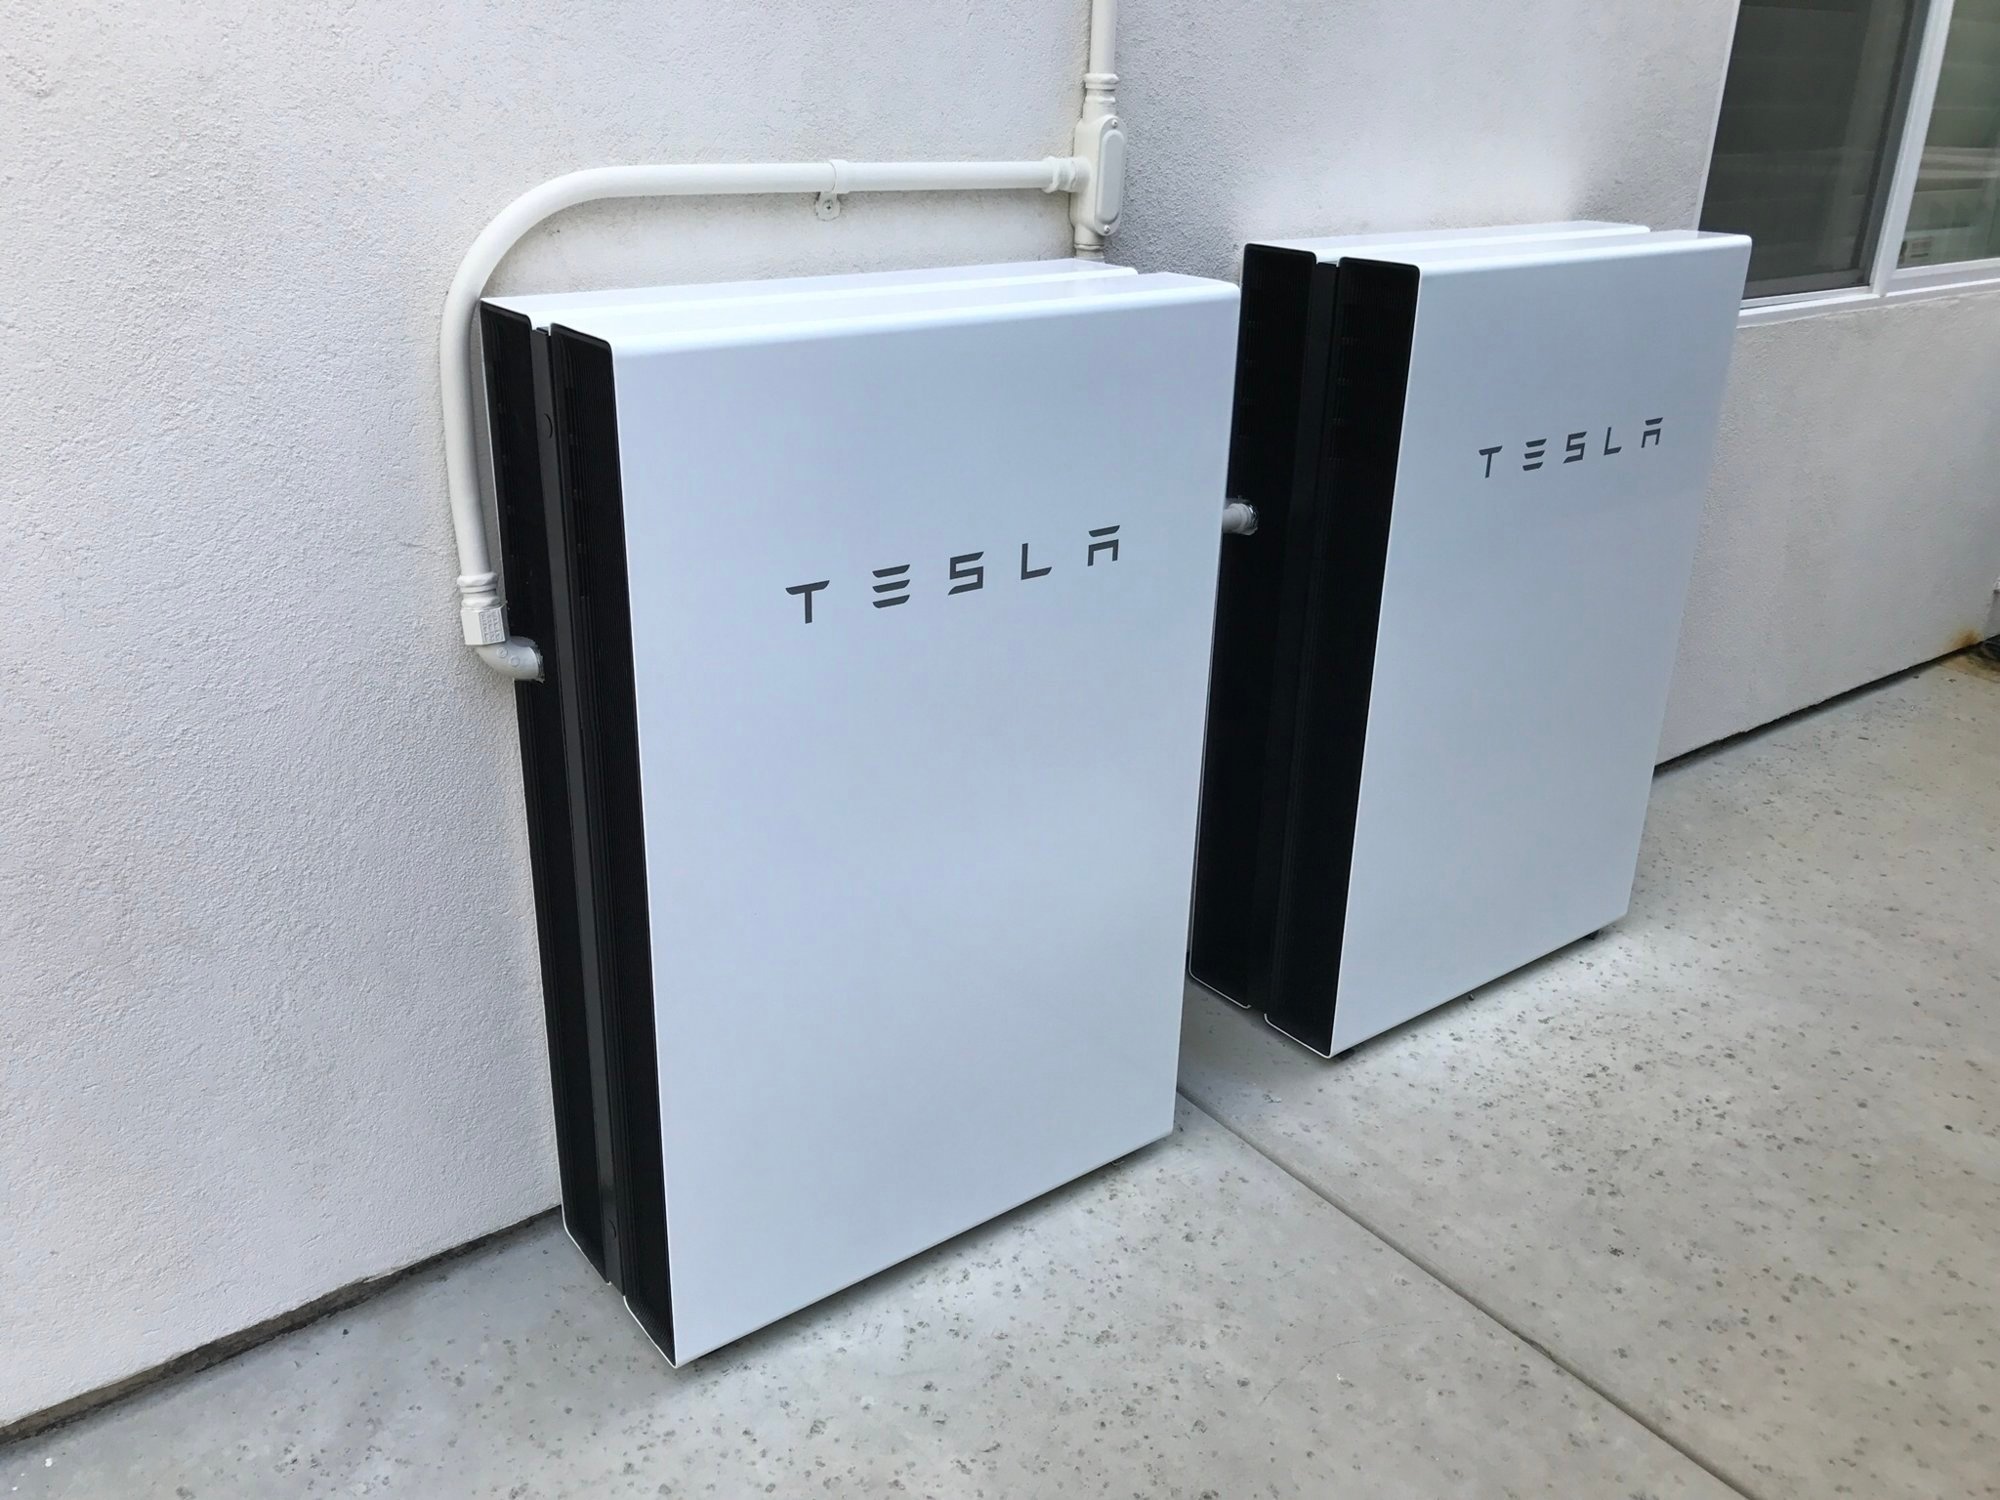 Electric Water Heaters Store Energy Better Than Tesla Powerwall